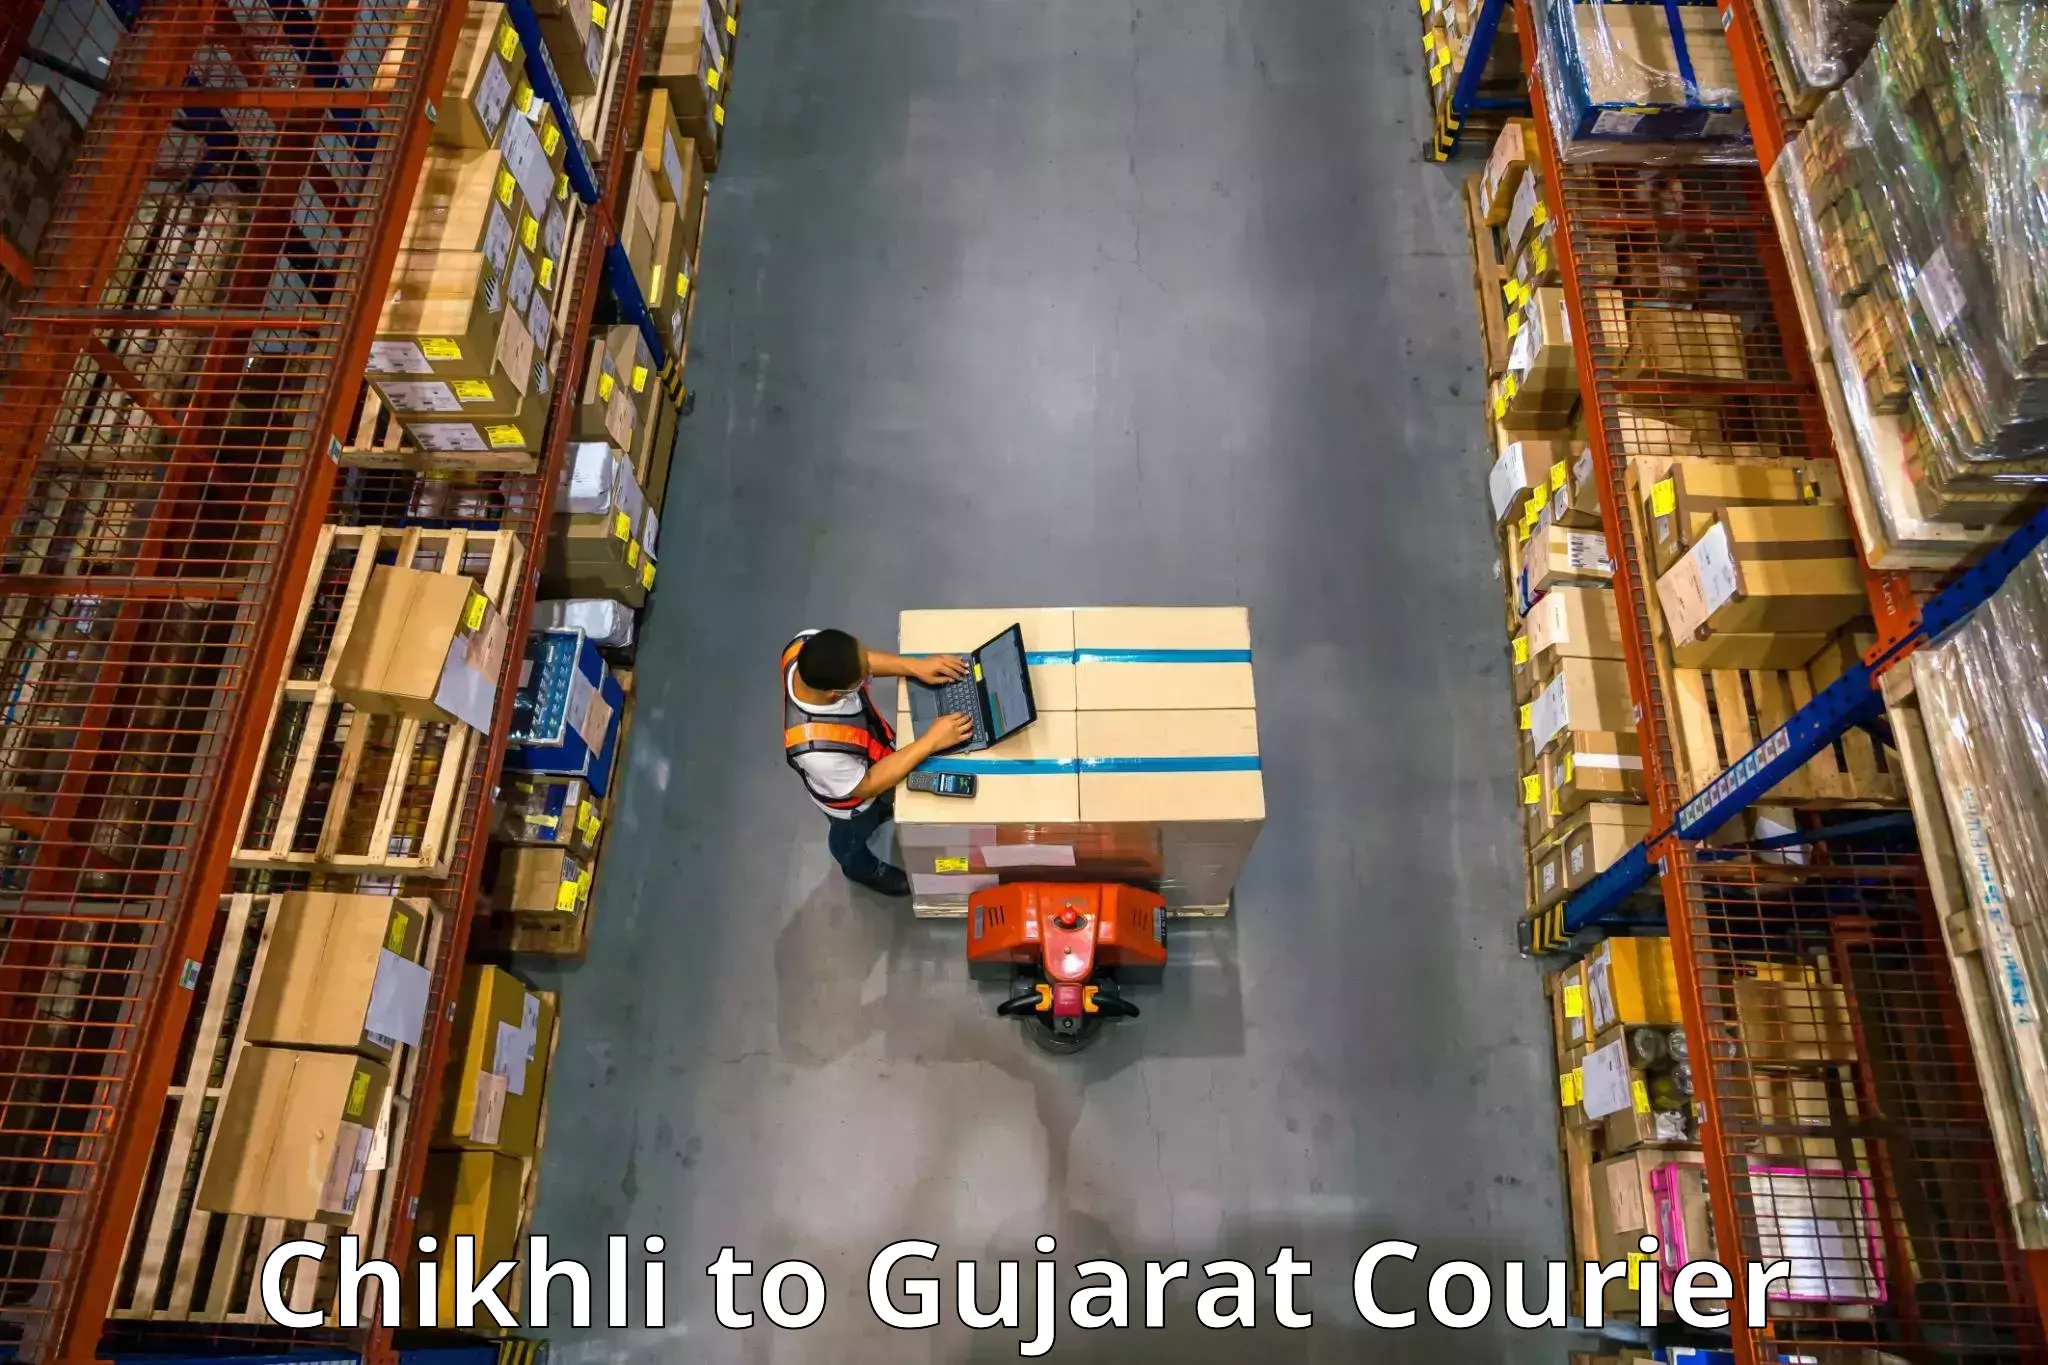 Furniture moving assistance Chikhli to Gujarat